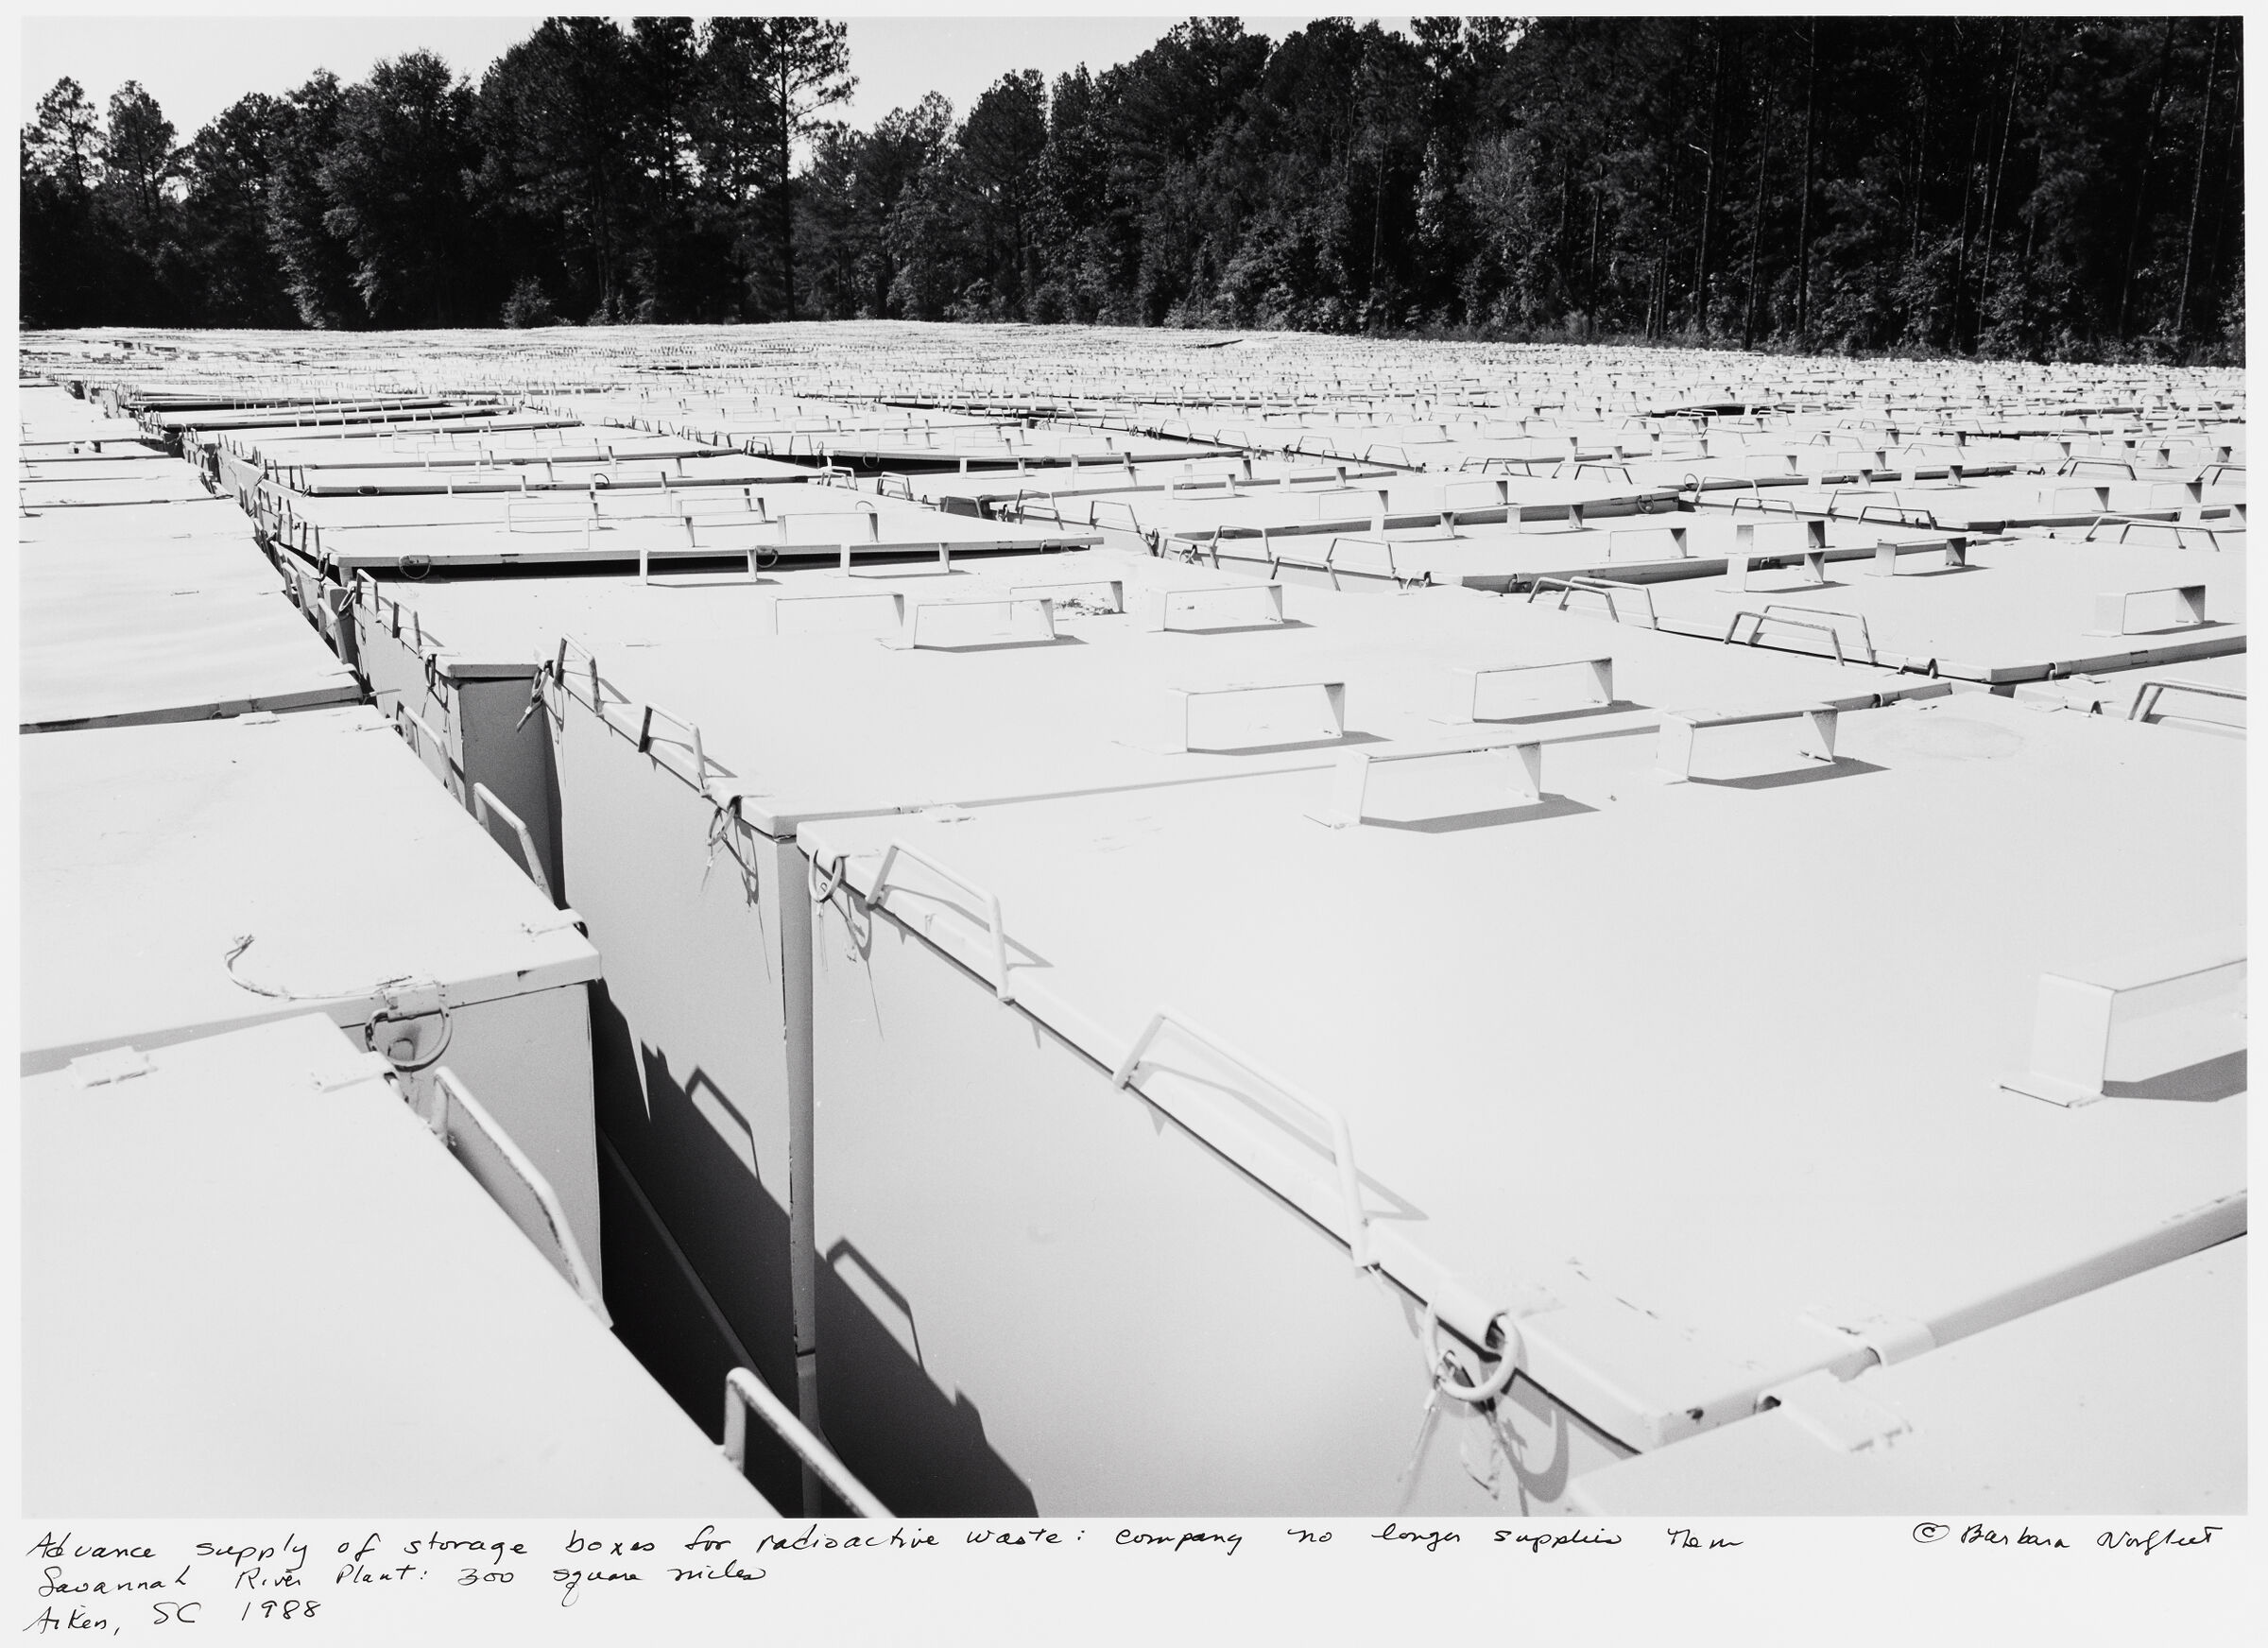 Advance Supply Of Storage Boxes For Radioactive Waste: Company No Longer Supplies Them, Savannah River Plant: 300 Square Miles, Aiken, Sc